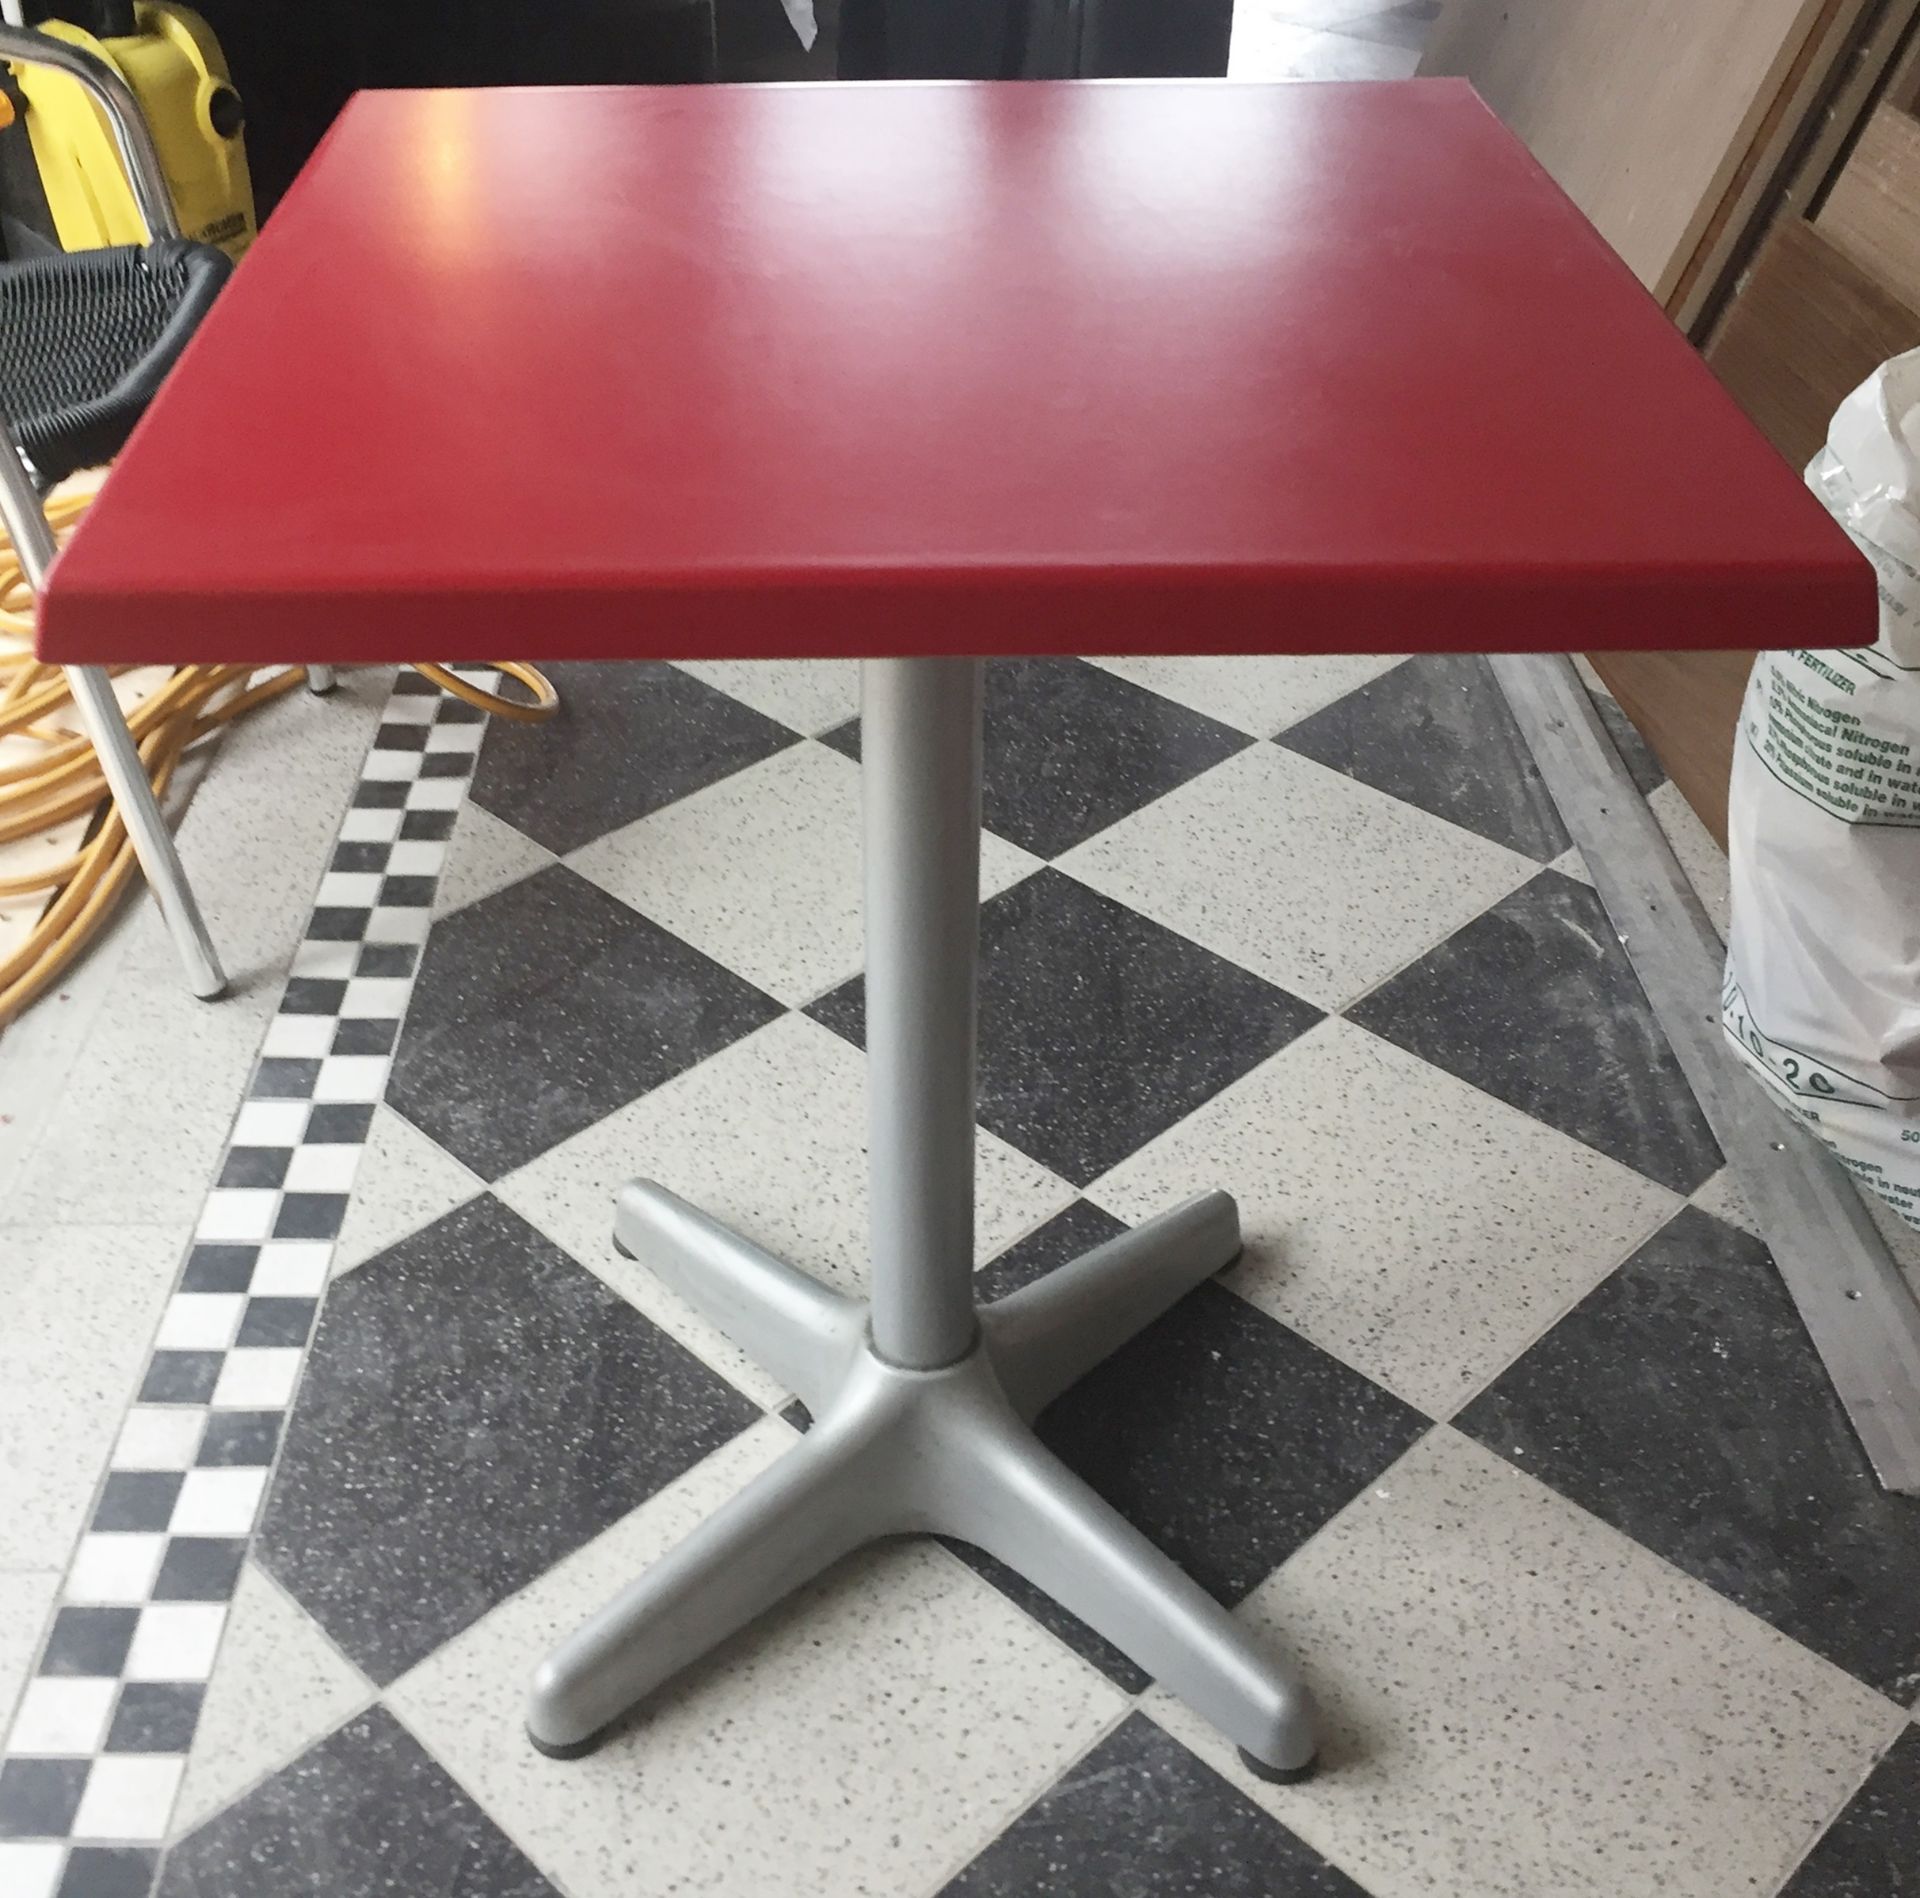 3 x Retro Square Bistro Tables - Red Tops With Silver Bases - CL235 - Location: London N1 These - Image 3 of 4